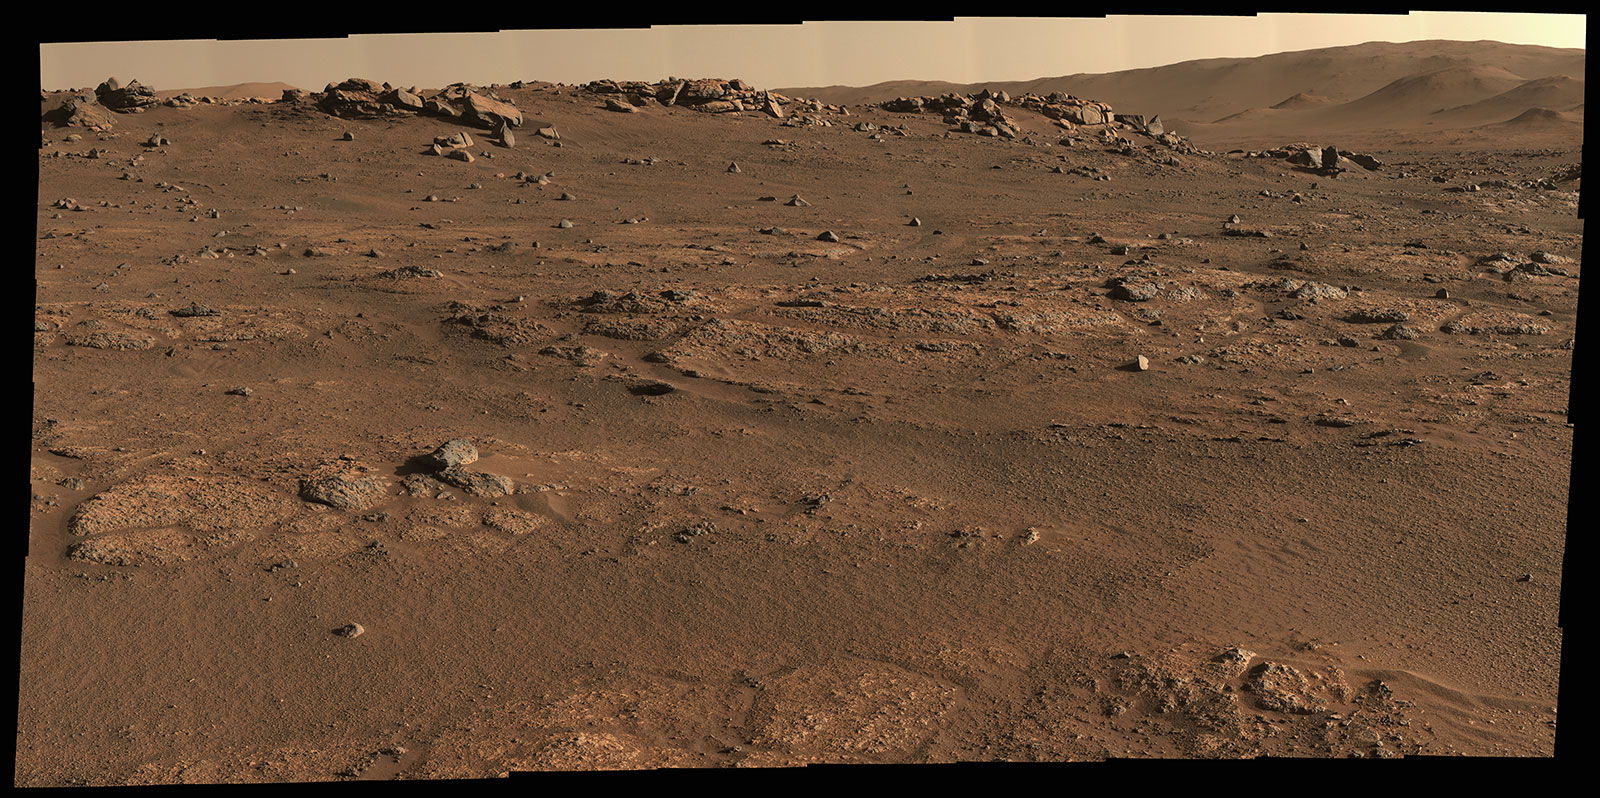 This is a colored image of the rocky, sandy surface of Mars. Large rocks and hills can be seen further away. Closer up rocks are embedded in the surface. This panorama is seen here in natural color (Figure 1) and enhanced color (Figure 2).